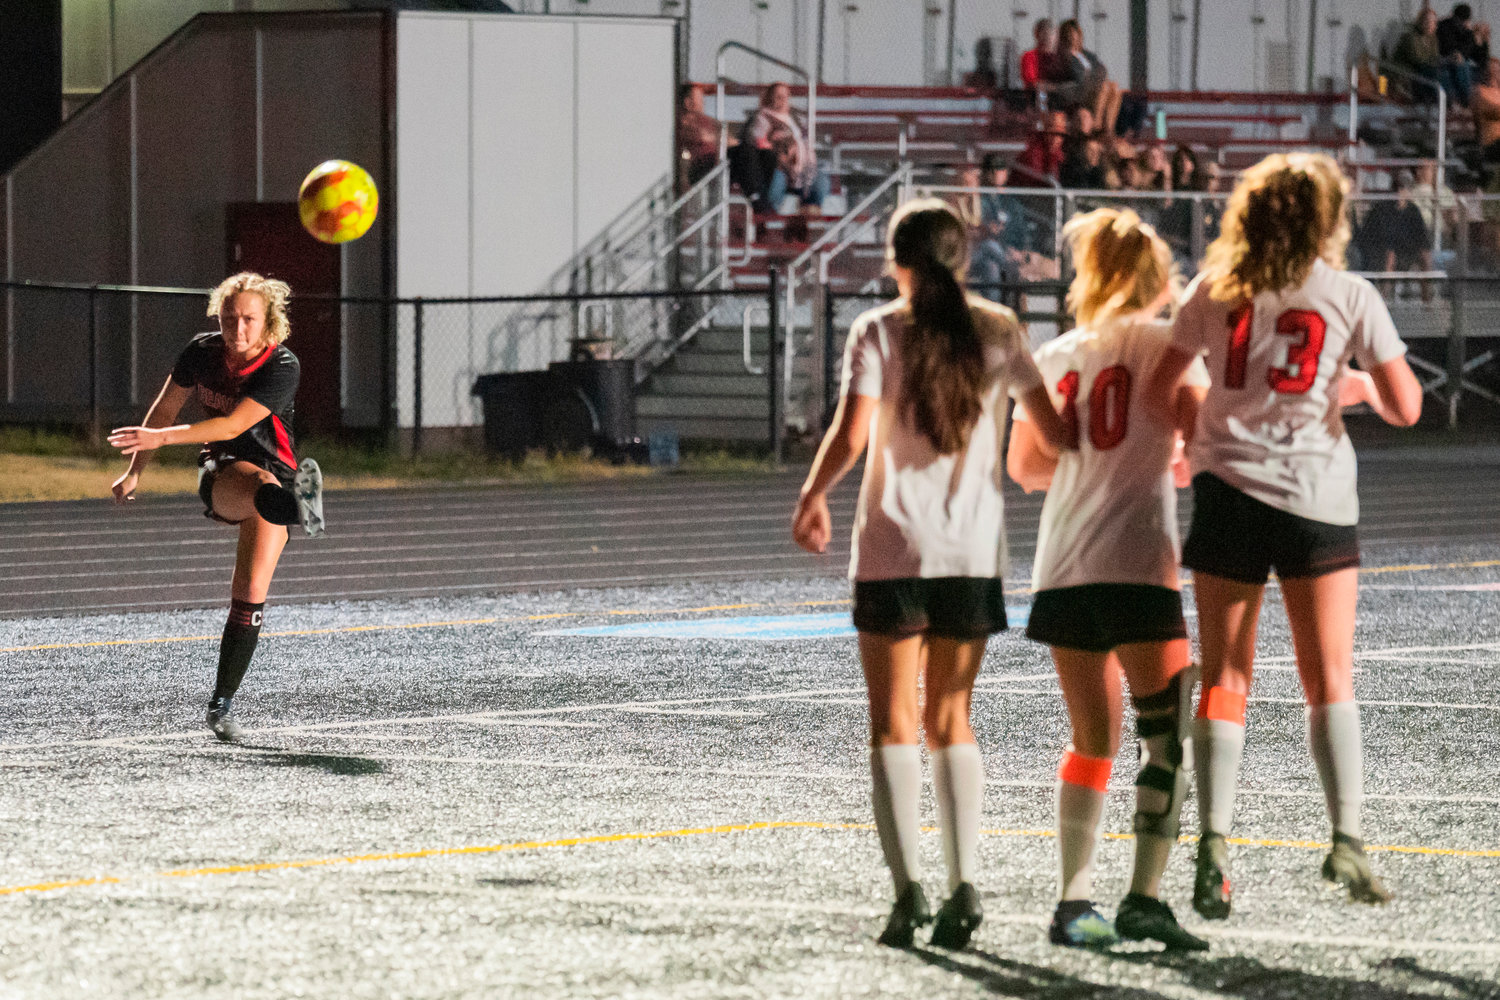 FILE PHOTO - Tenino attempts to score during a free kick at Beaver Stadium as Centralia defends their goal with a wall Tuesday night.